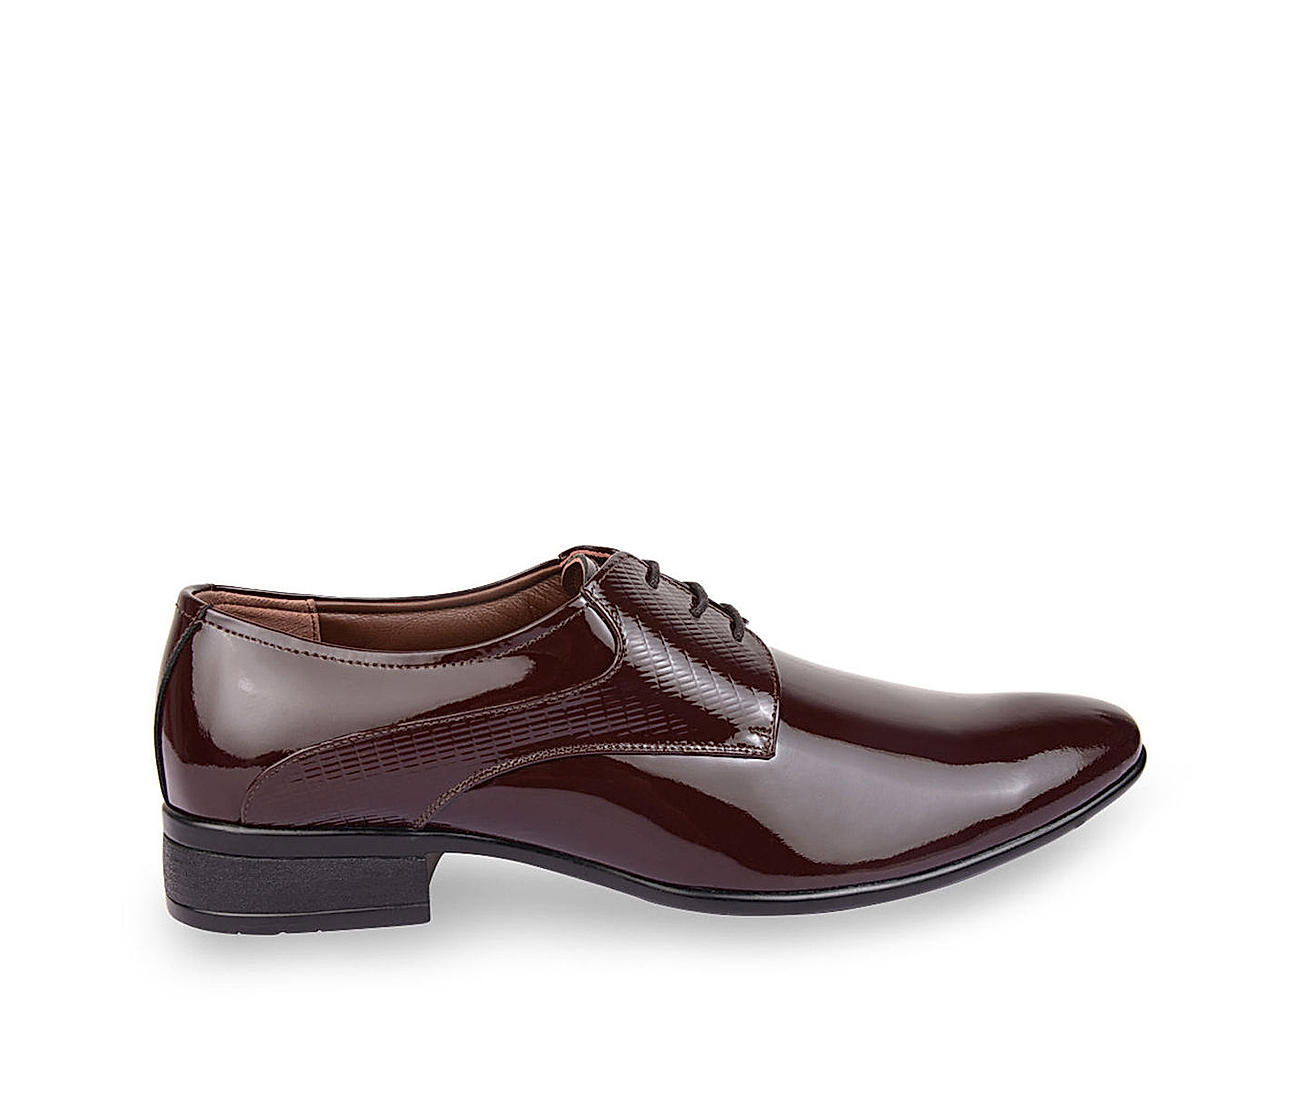 8 Size Mens Formal Shoes :Buy 8 Size Mens Formal Shoes Online at Low Prices  - Snapdeal India